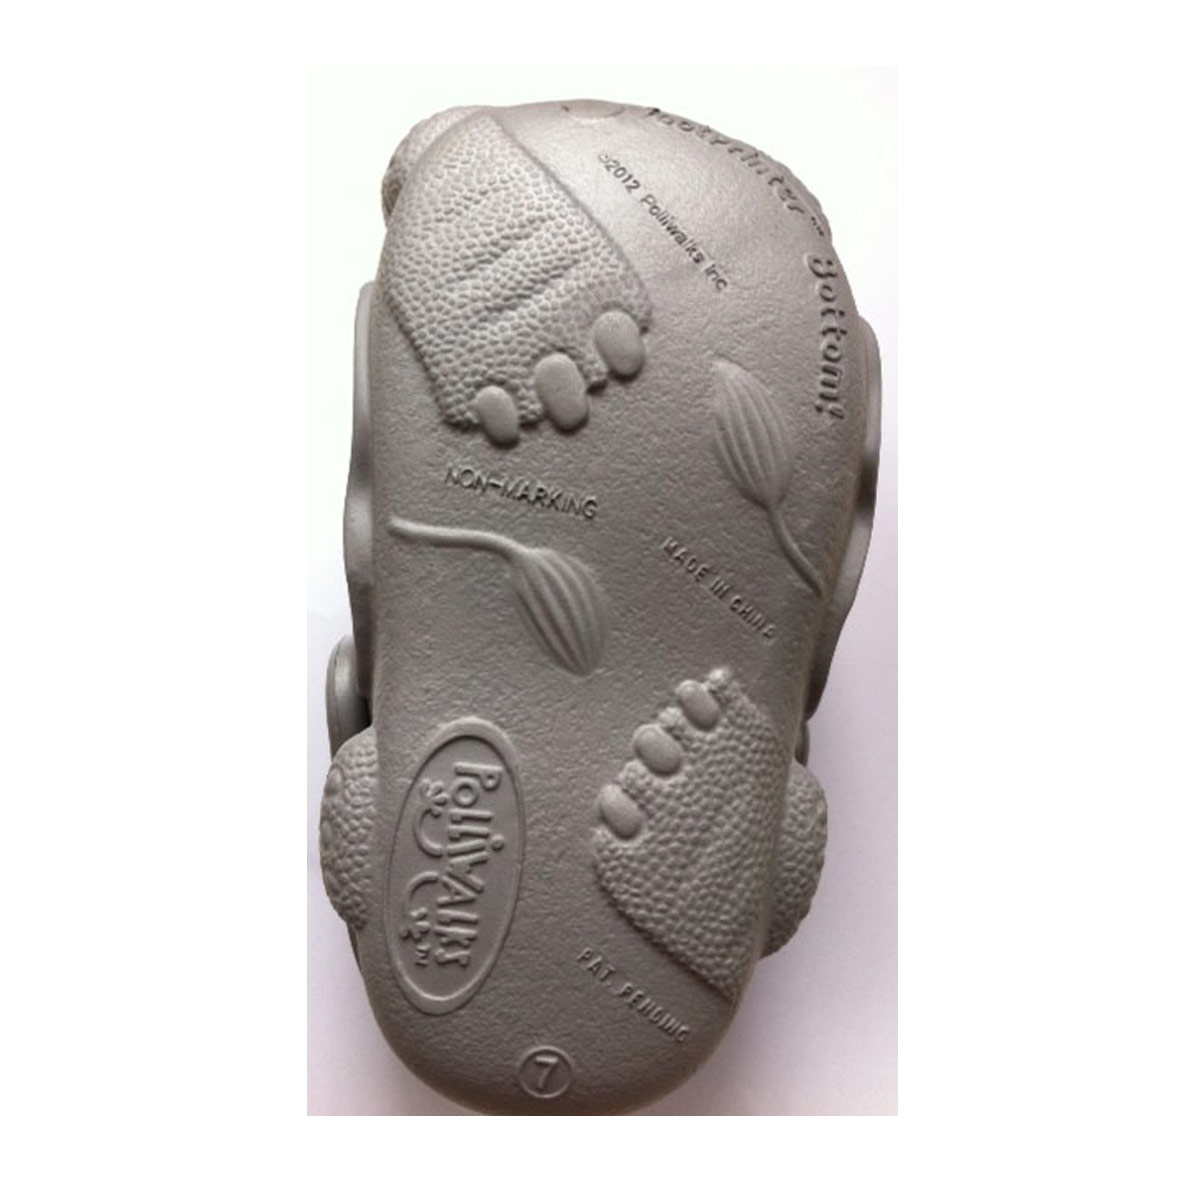 Polliwalks : Toddler shoes Ethan the ELEPHANT Gray # 8